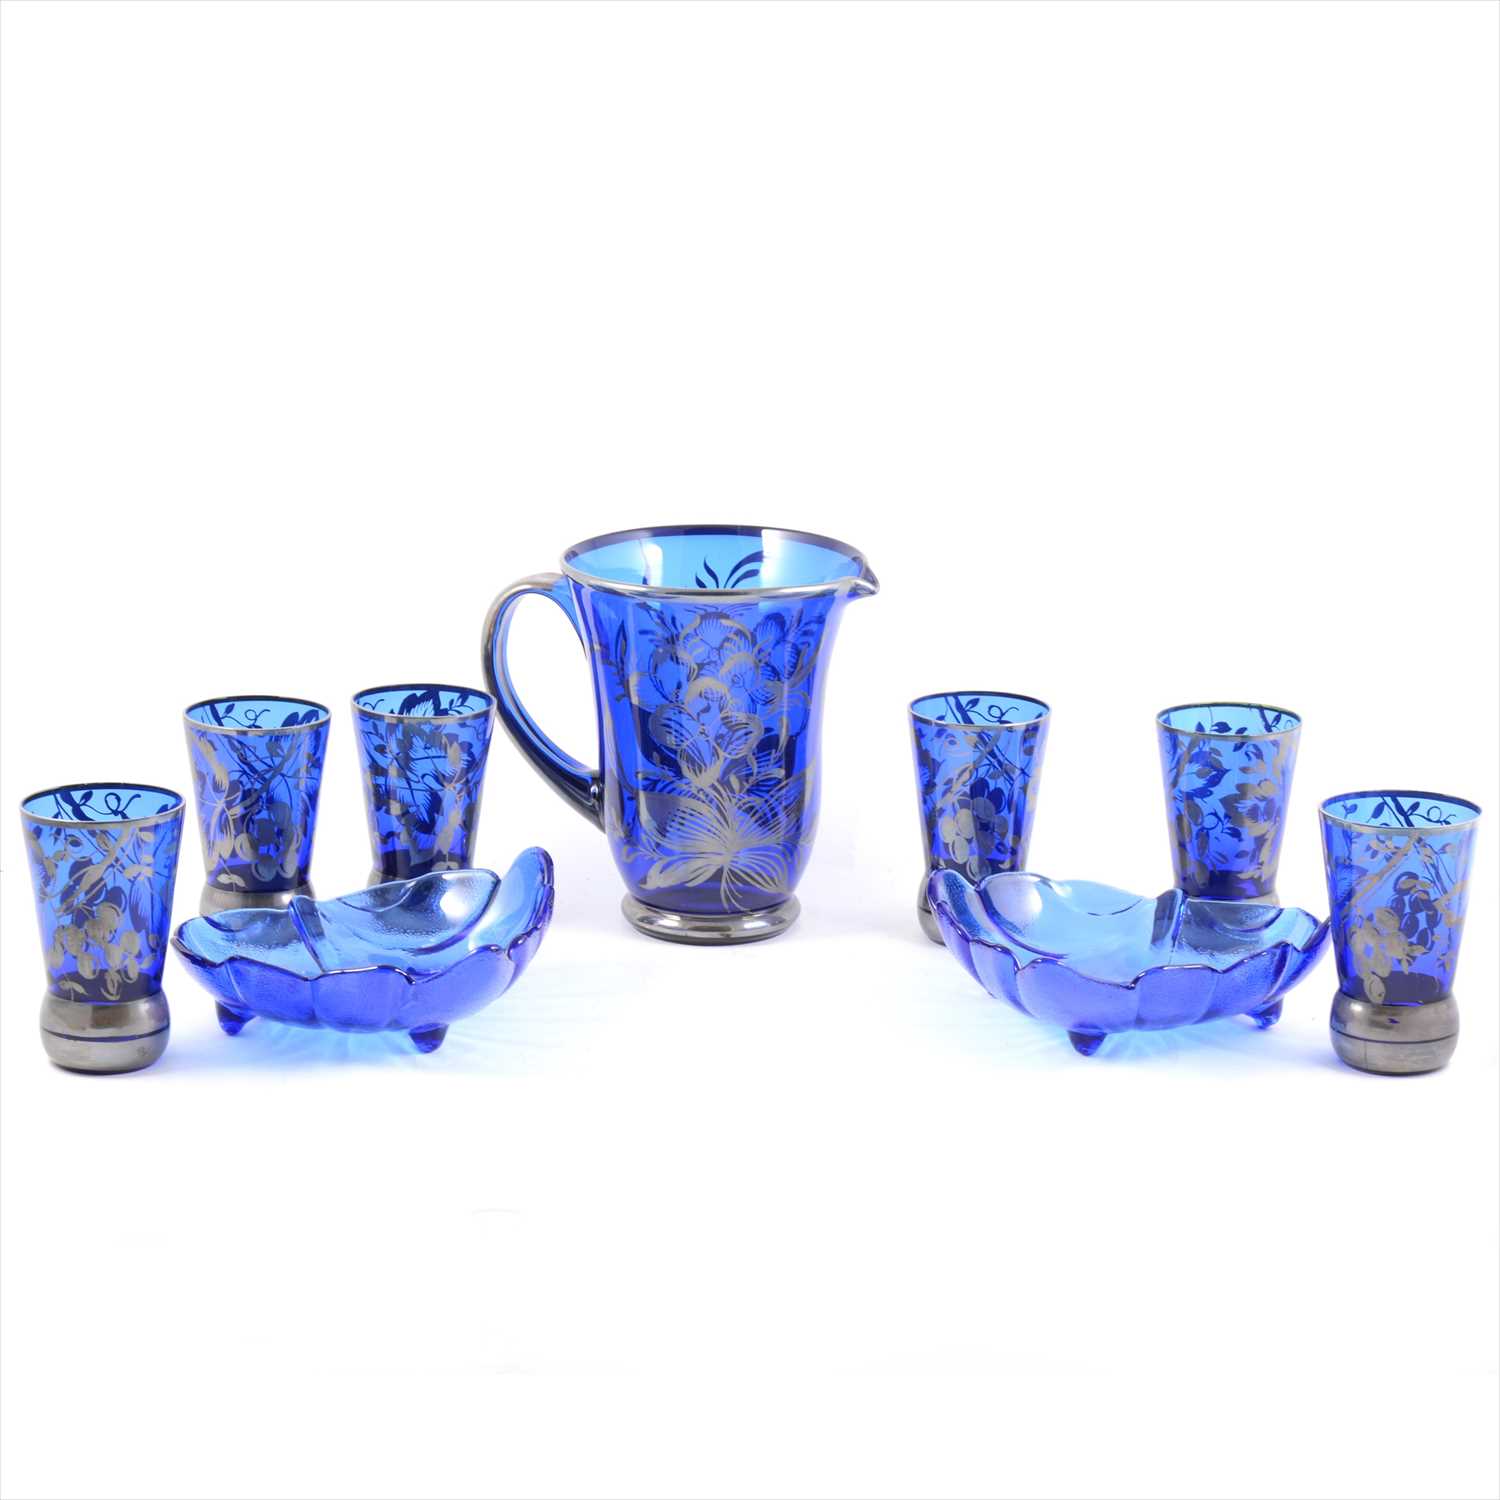 Lot 28 - A 1920s blue glass lemonade jug and set of six tumblers, silvered overlay, two modern blue glass dishes.